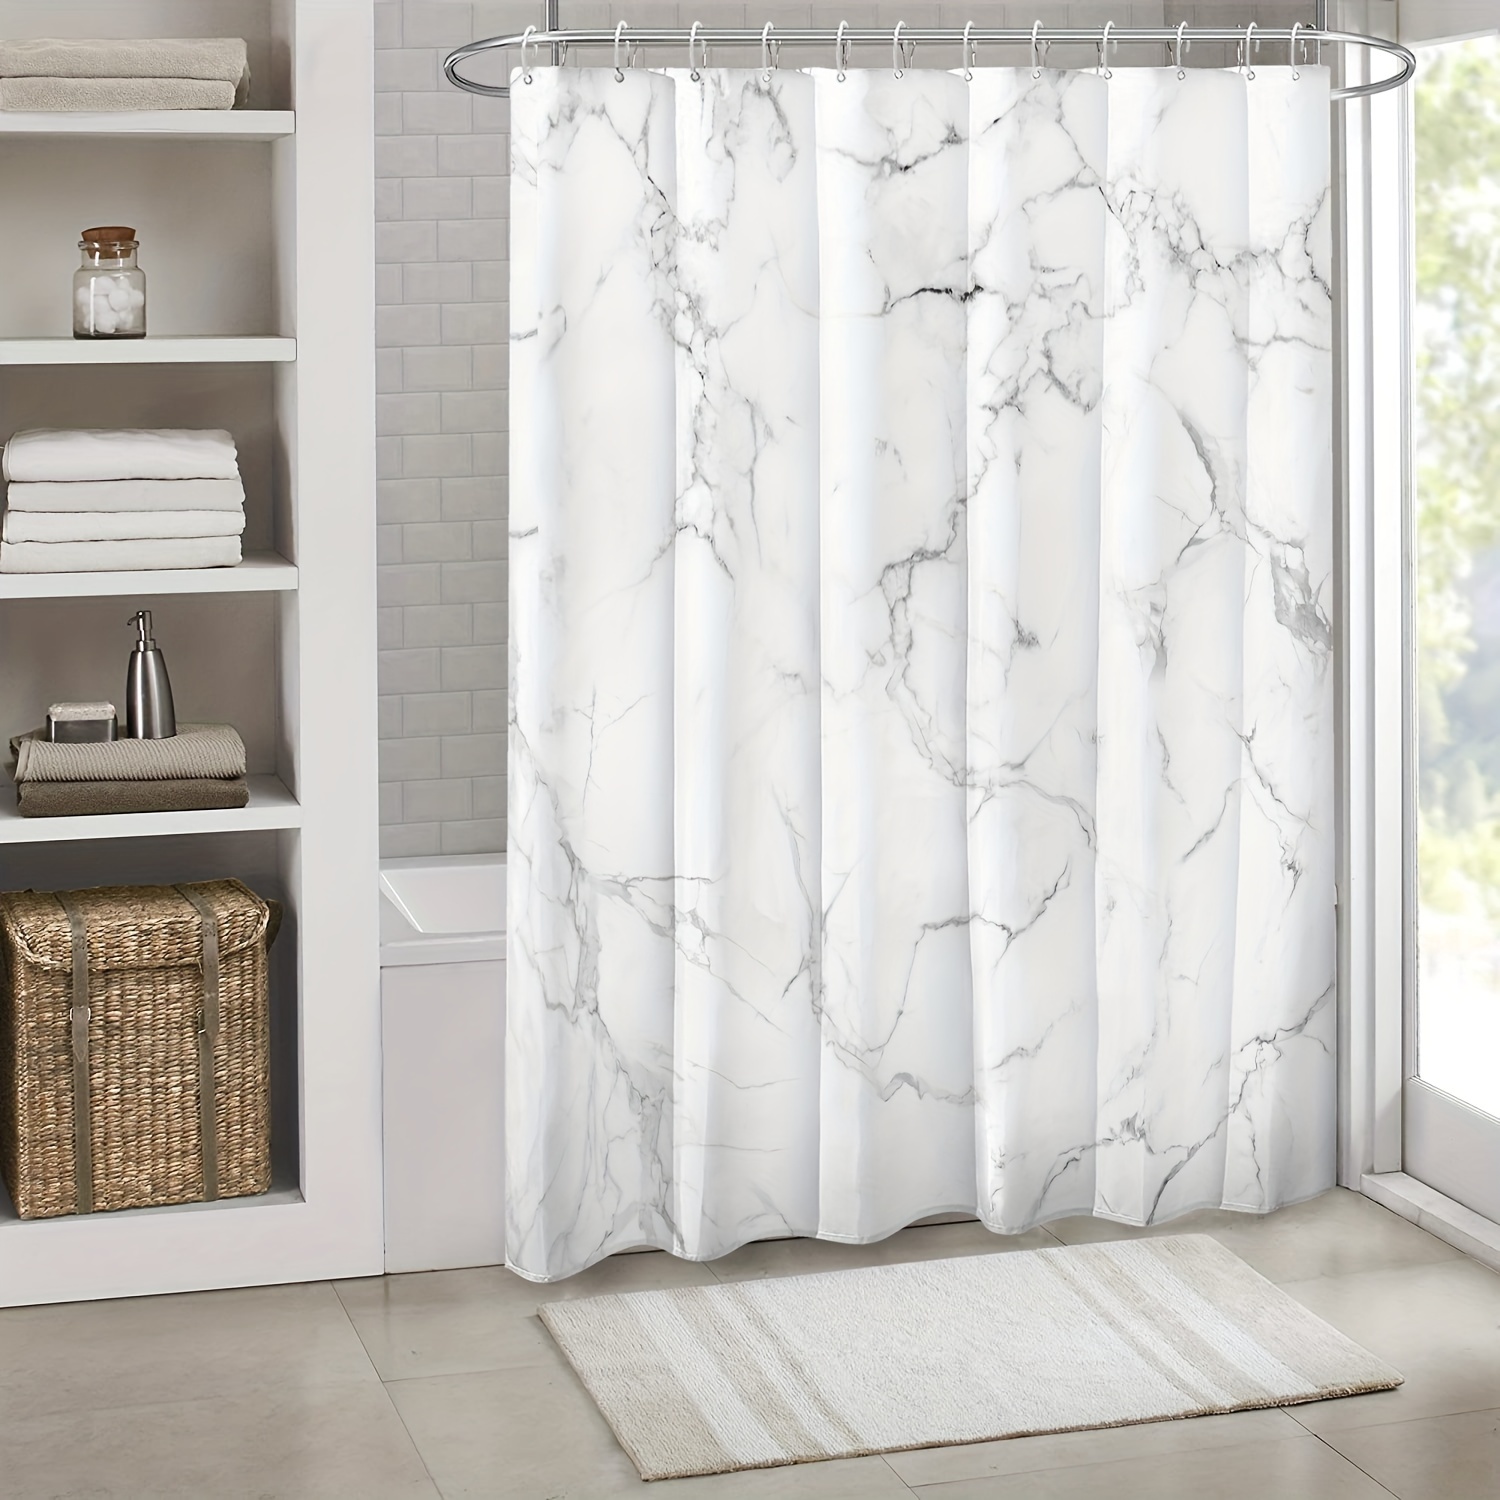 

1pc, Marble Pattern Shower Curtain, Light Grey Striped White, Waterproof Bathroom Decor With Plastic Hooks, Machine Washable, Suitable For Home & Hotel Bathrooms